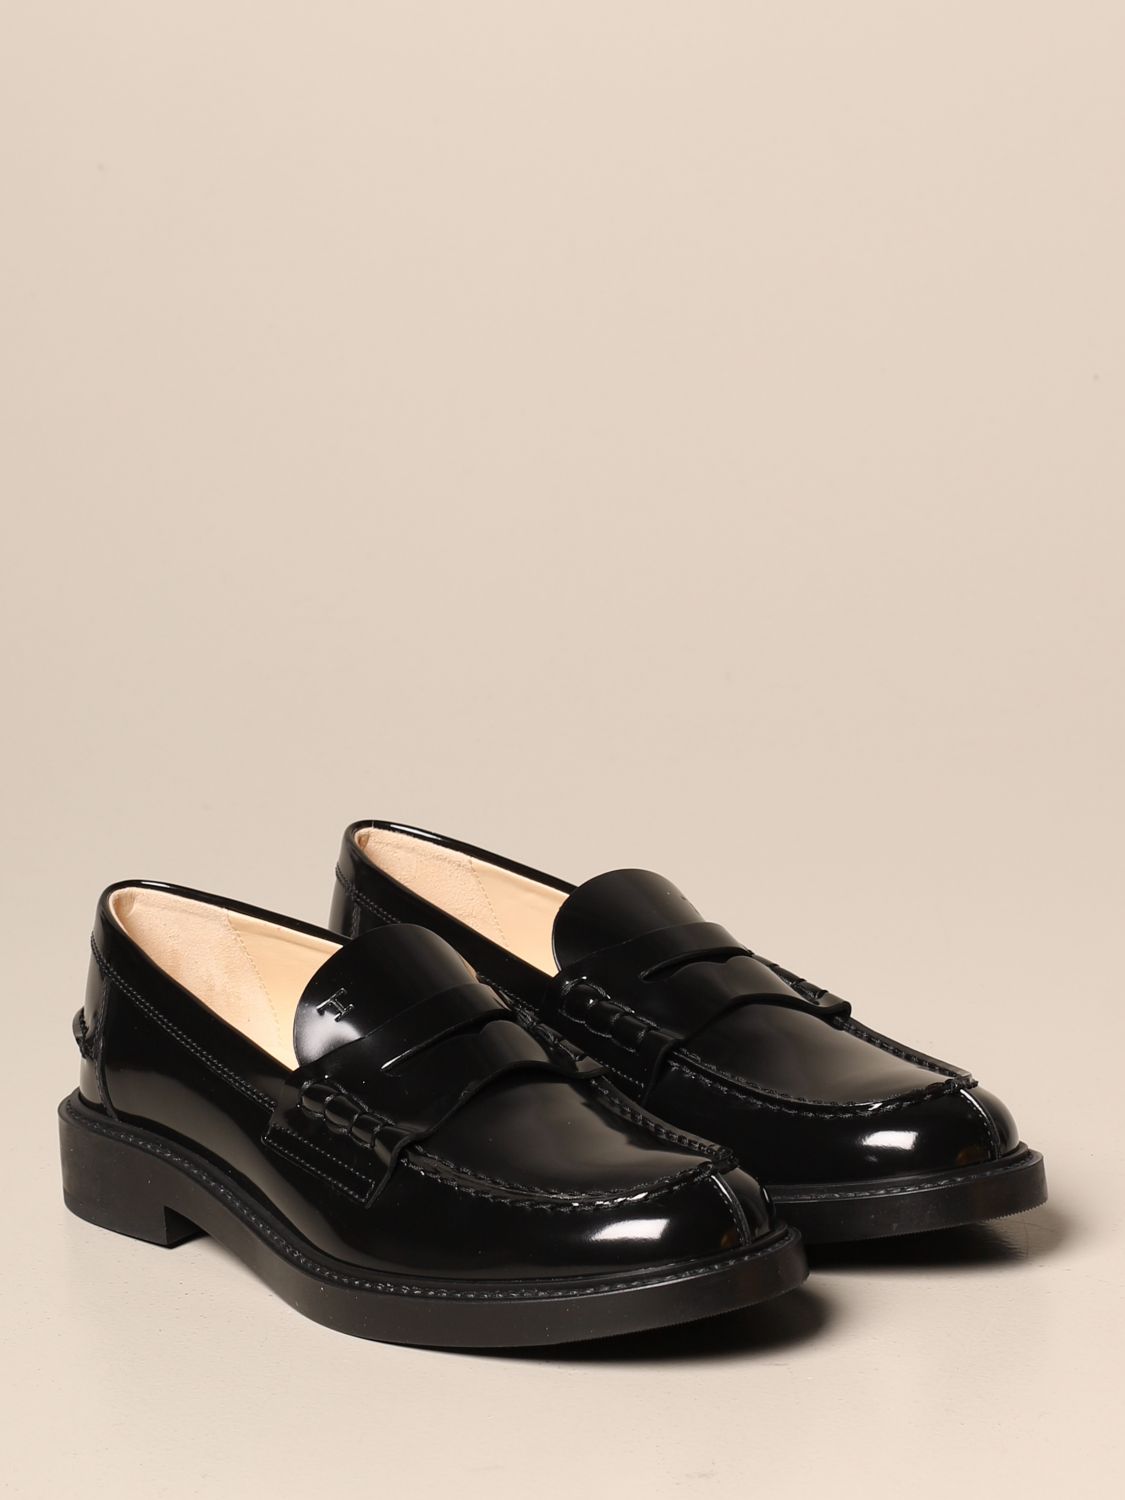 Tods Outlet: Mocassino Tod's in pelle spazzolata | Mocassini Tods Donna  Nero | Mocassini Tods XXW59C0DD40 MRK GIGLIO.COM